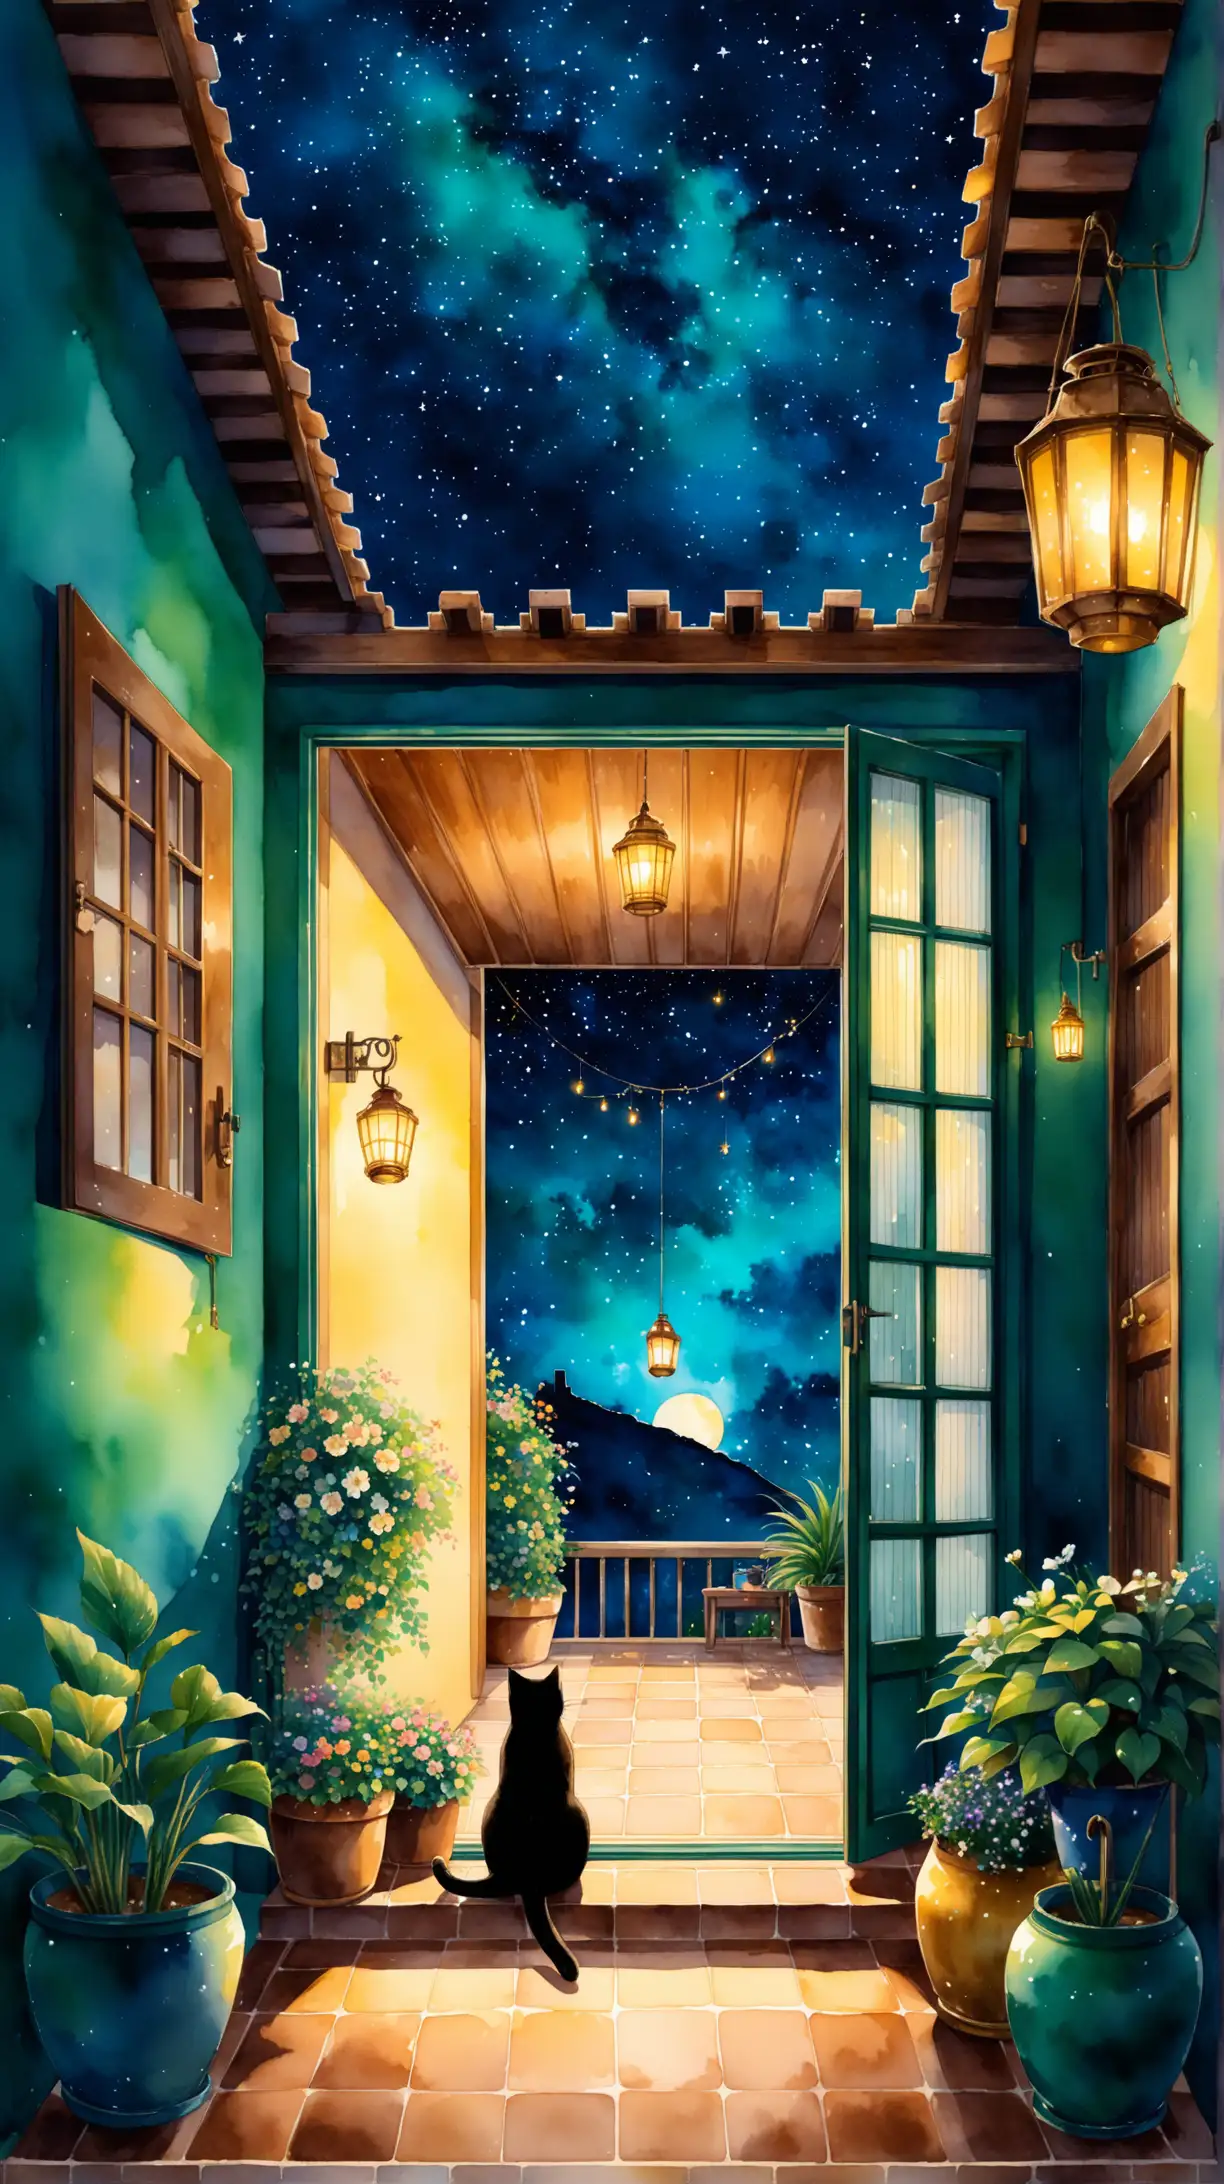 Indoor View Starry Night Sky and Curious Cat at Opened Door